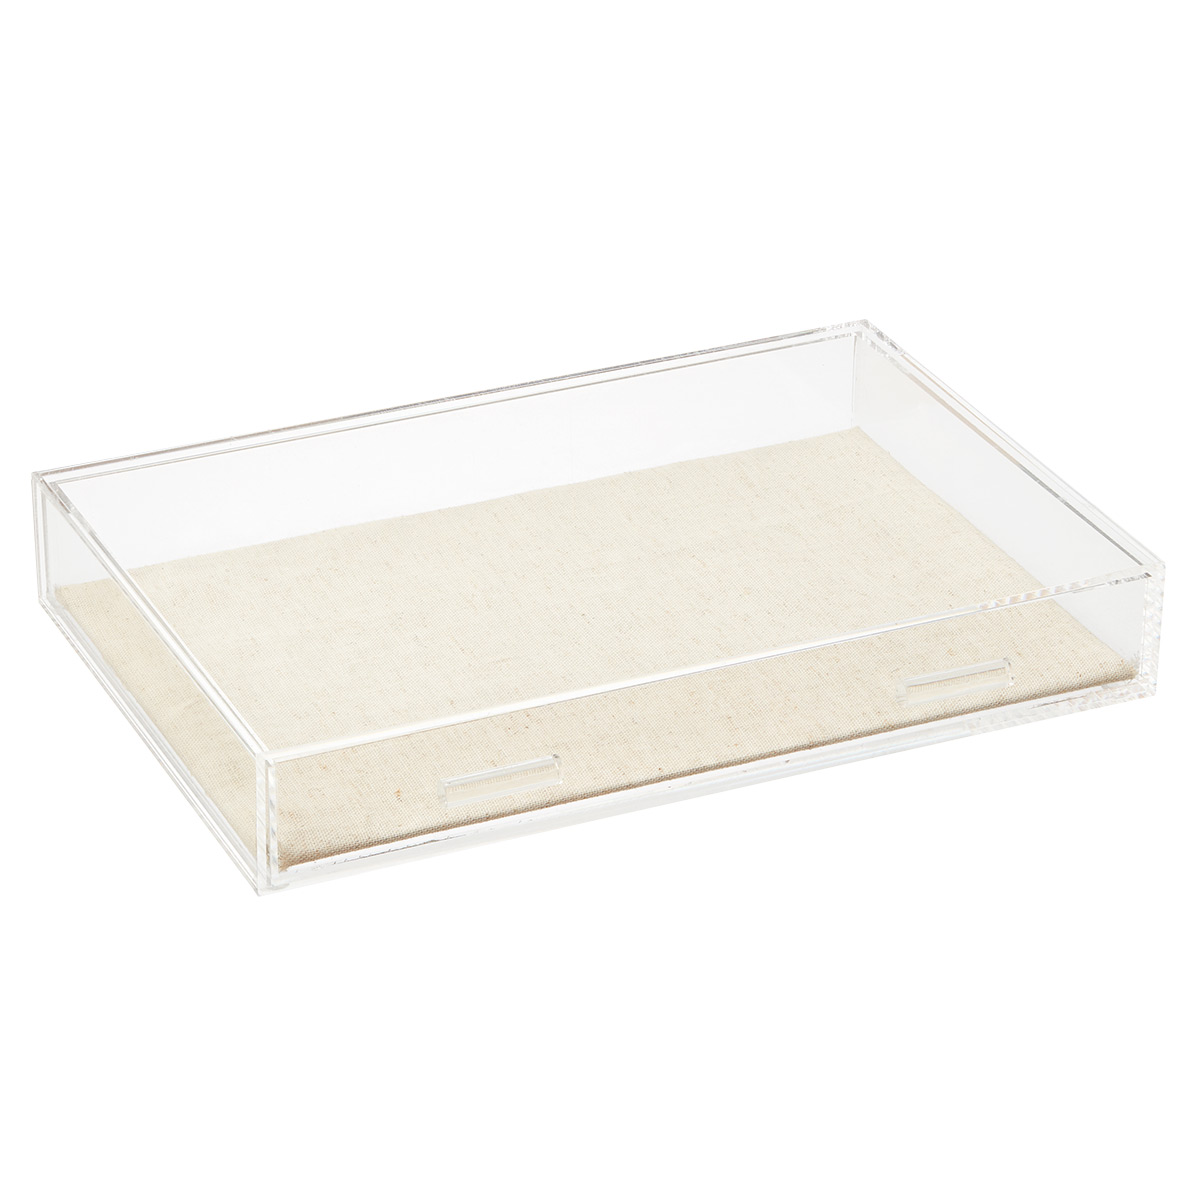 The Container Store 1-Compartment Wide Luxe Acrylic Jewelry Drawer Clear/Linen